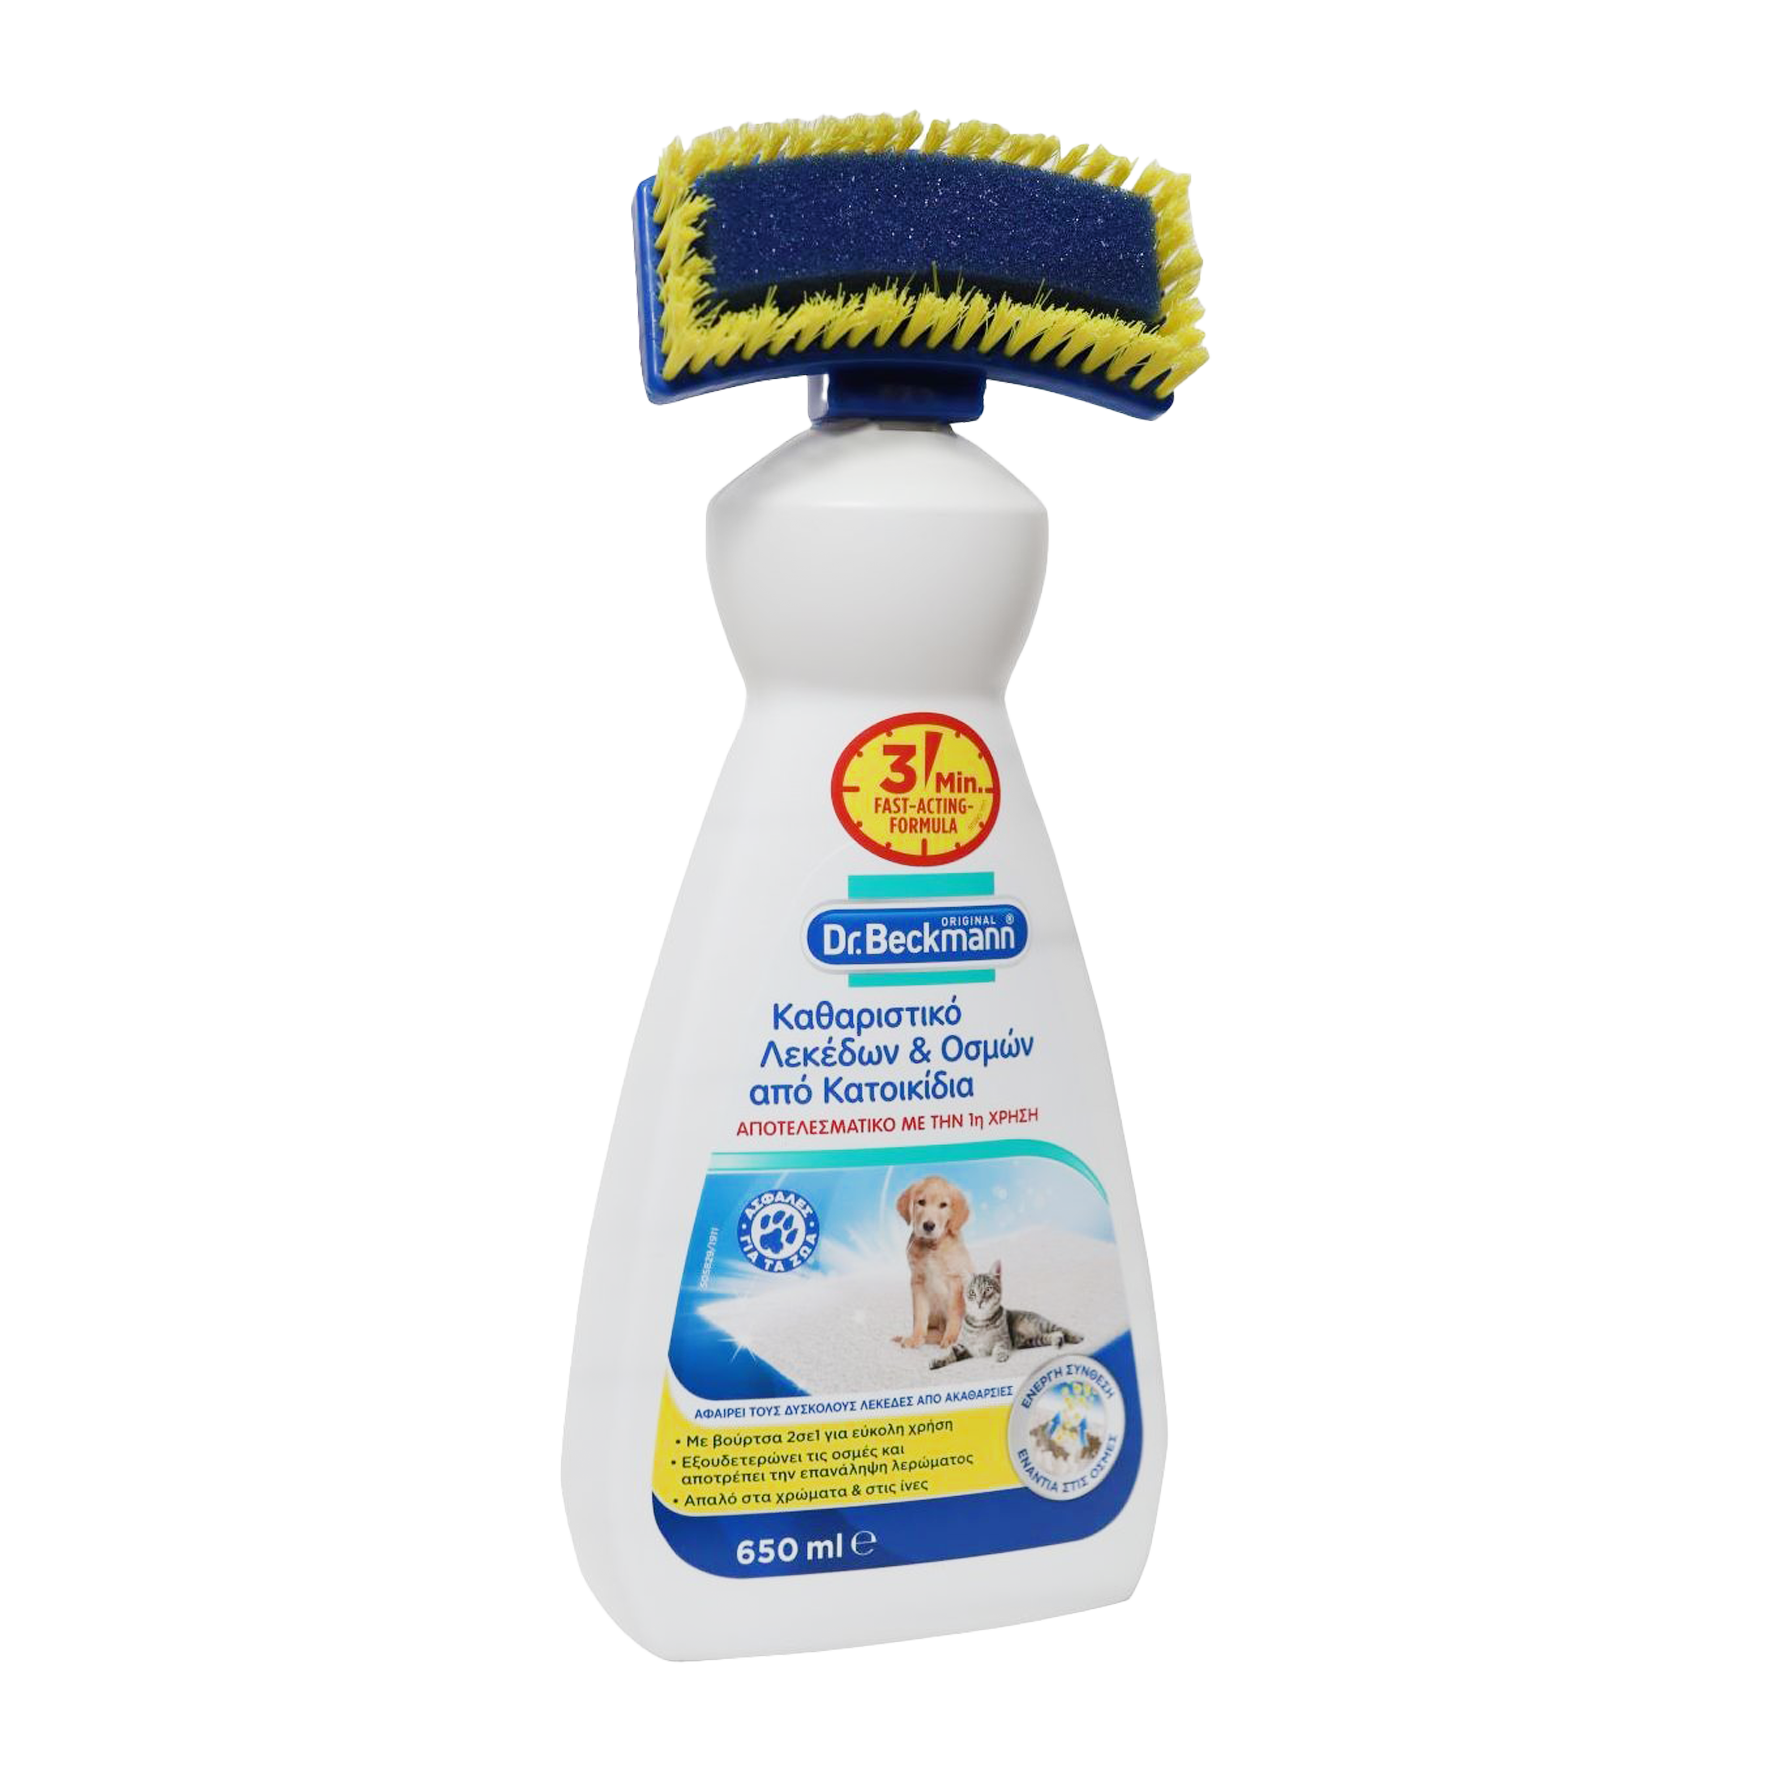 Dr. Beckmann Pet Stain and Odour Remover, 650 ml